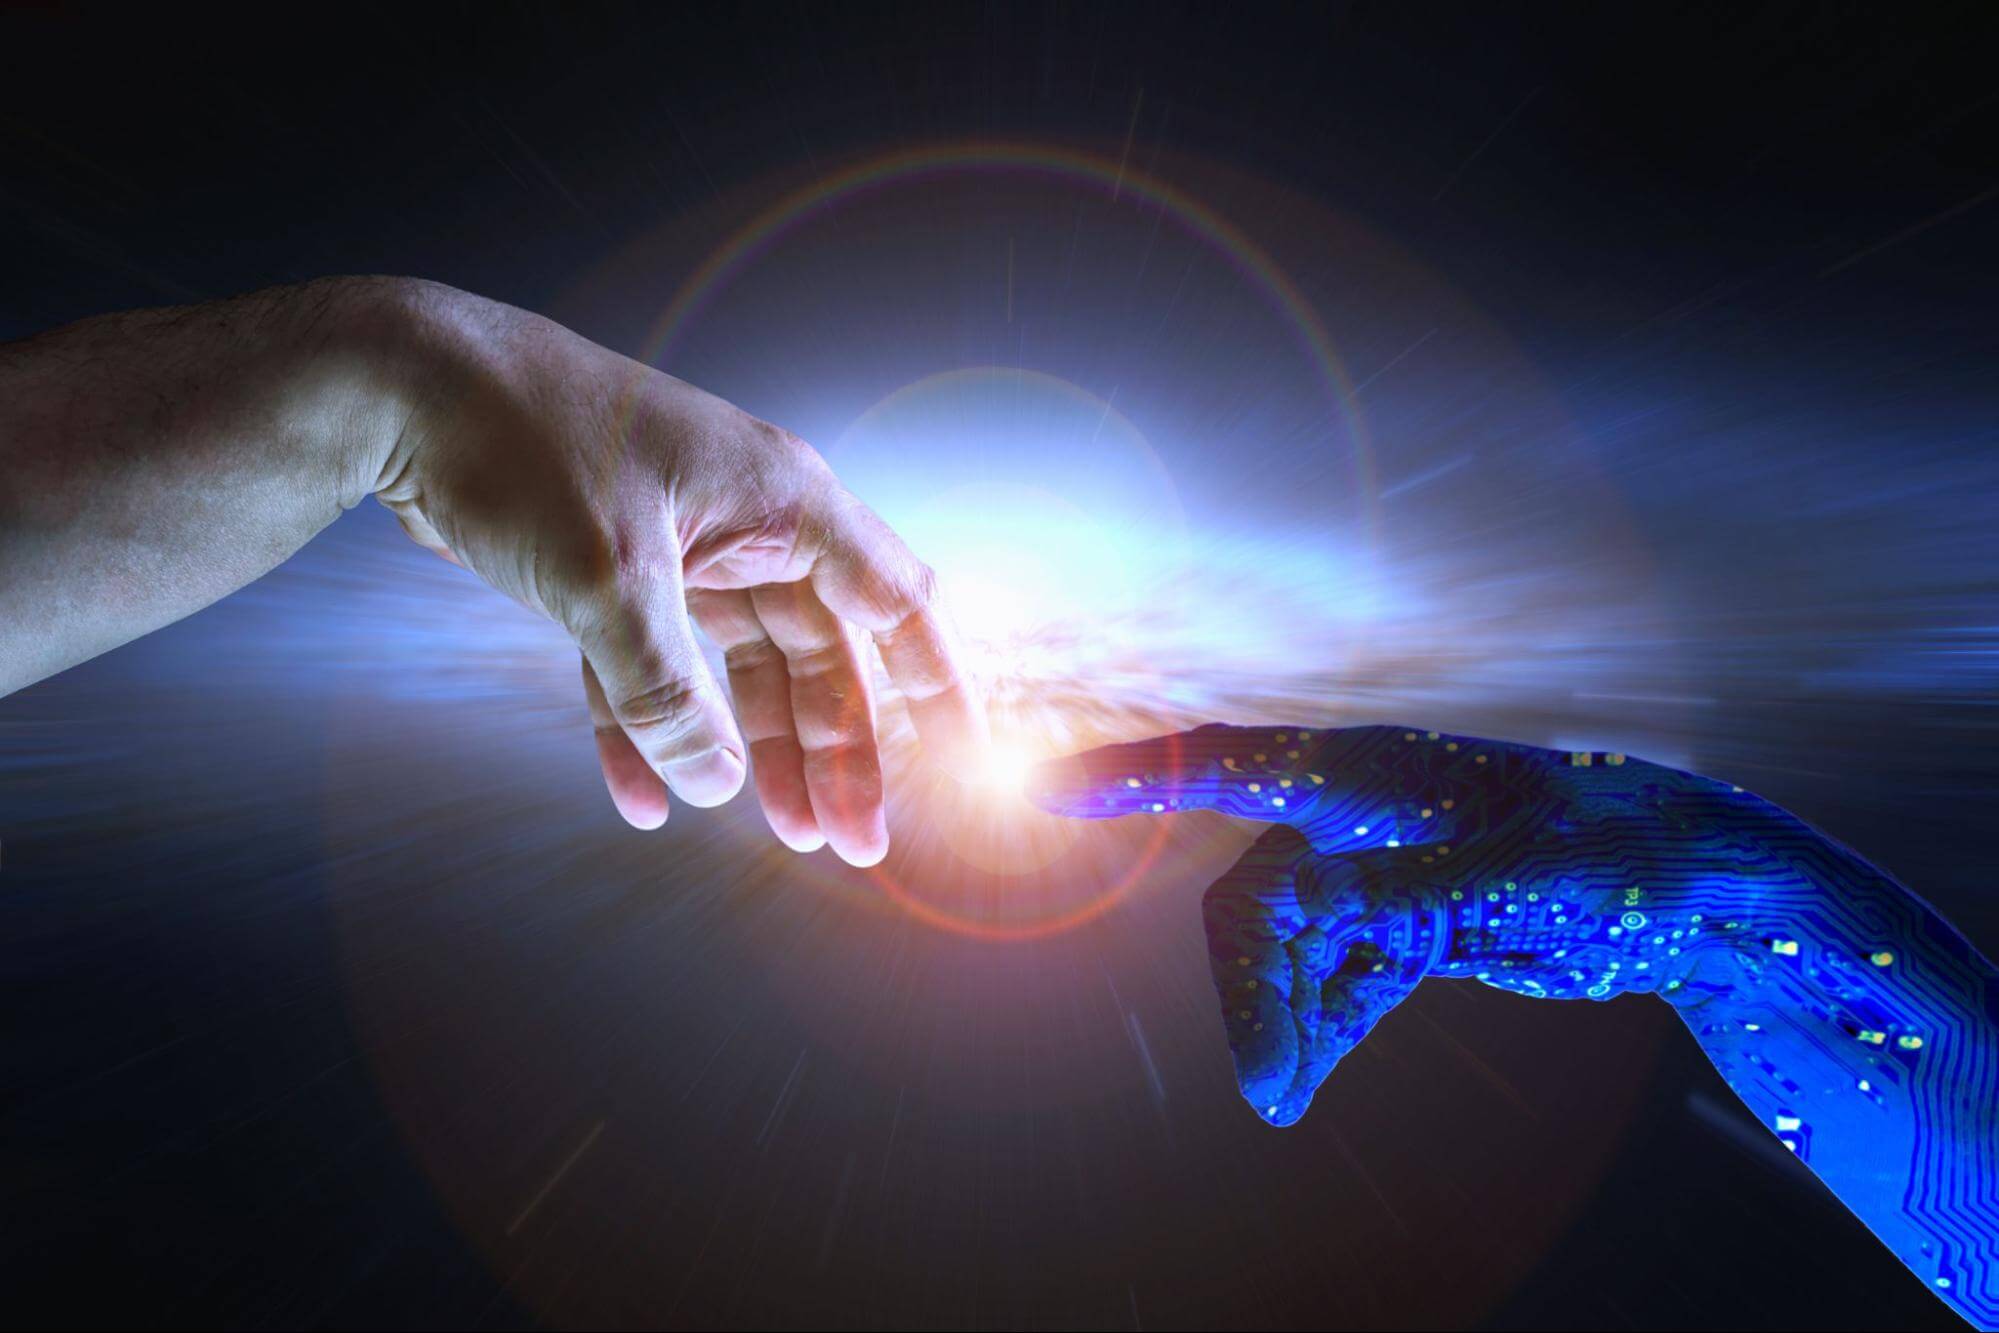 AI hand reaches towards a human hand as a spark of understanding technology reaches across to humanity. Artificial Intelligence concept with copy space area. Blue flesh image. The singularity